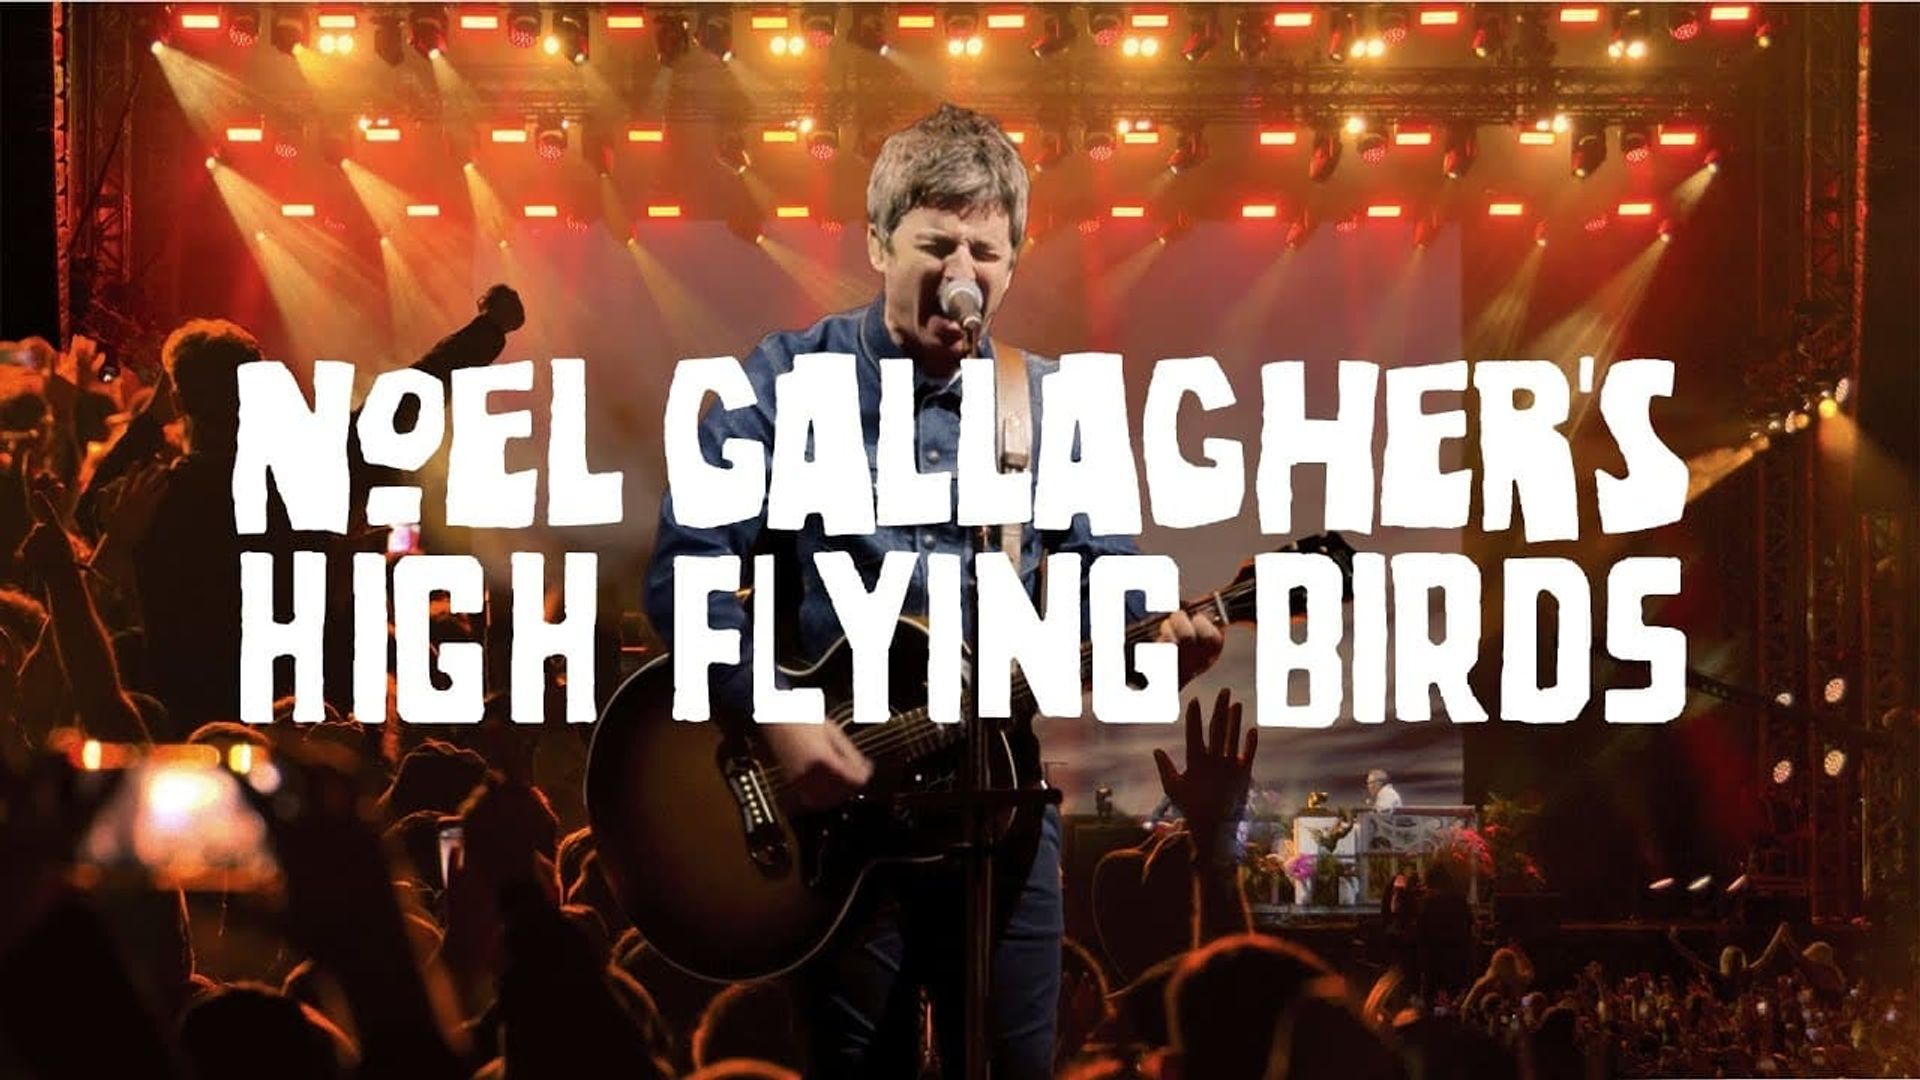 Noel Gallagher's High Flying Birds: Live in Manchester background